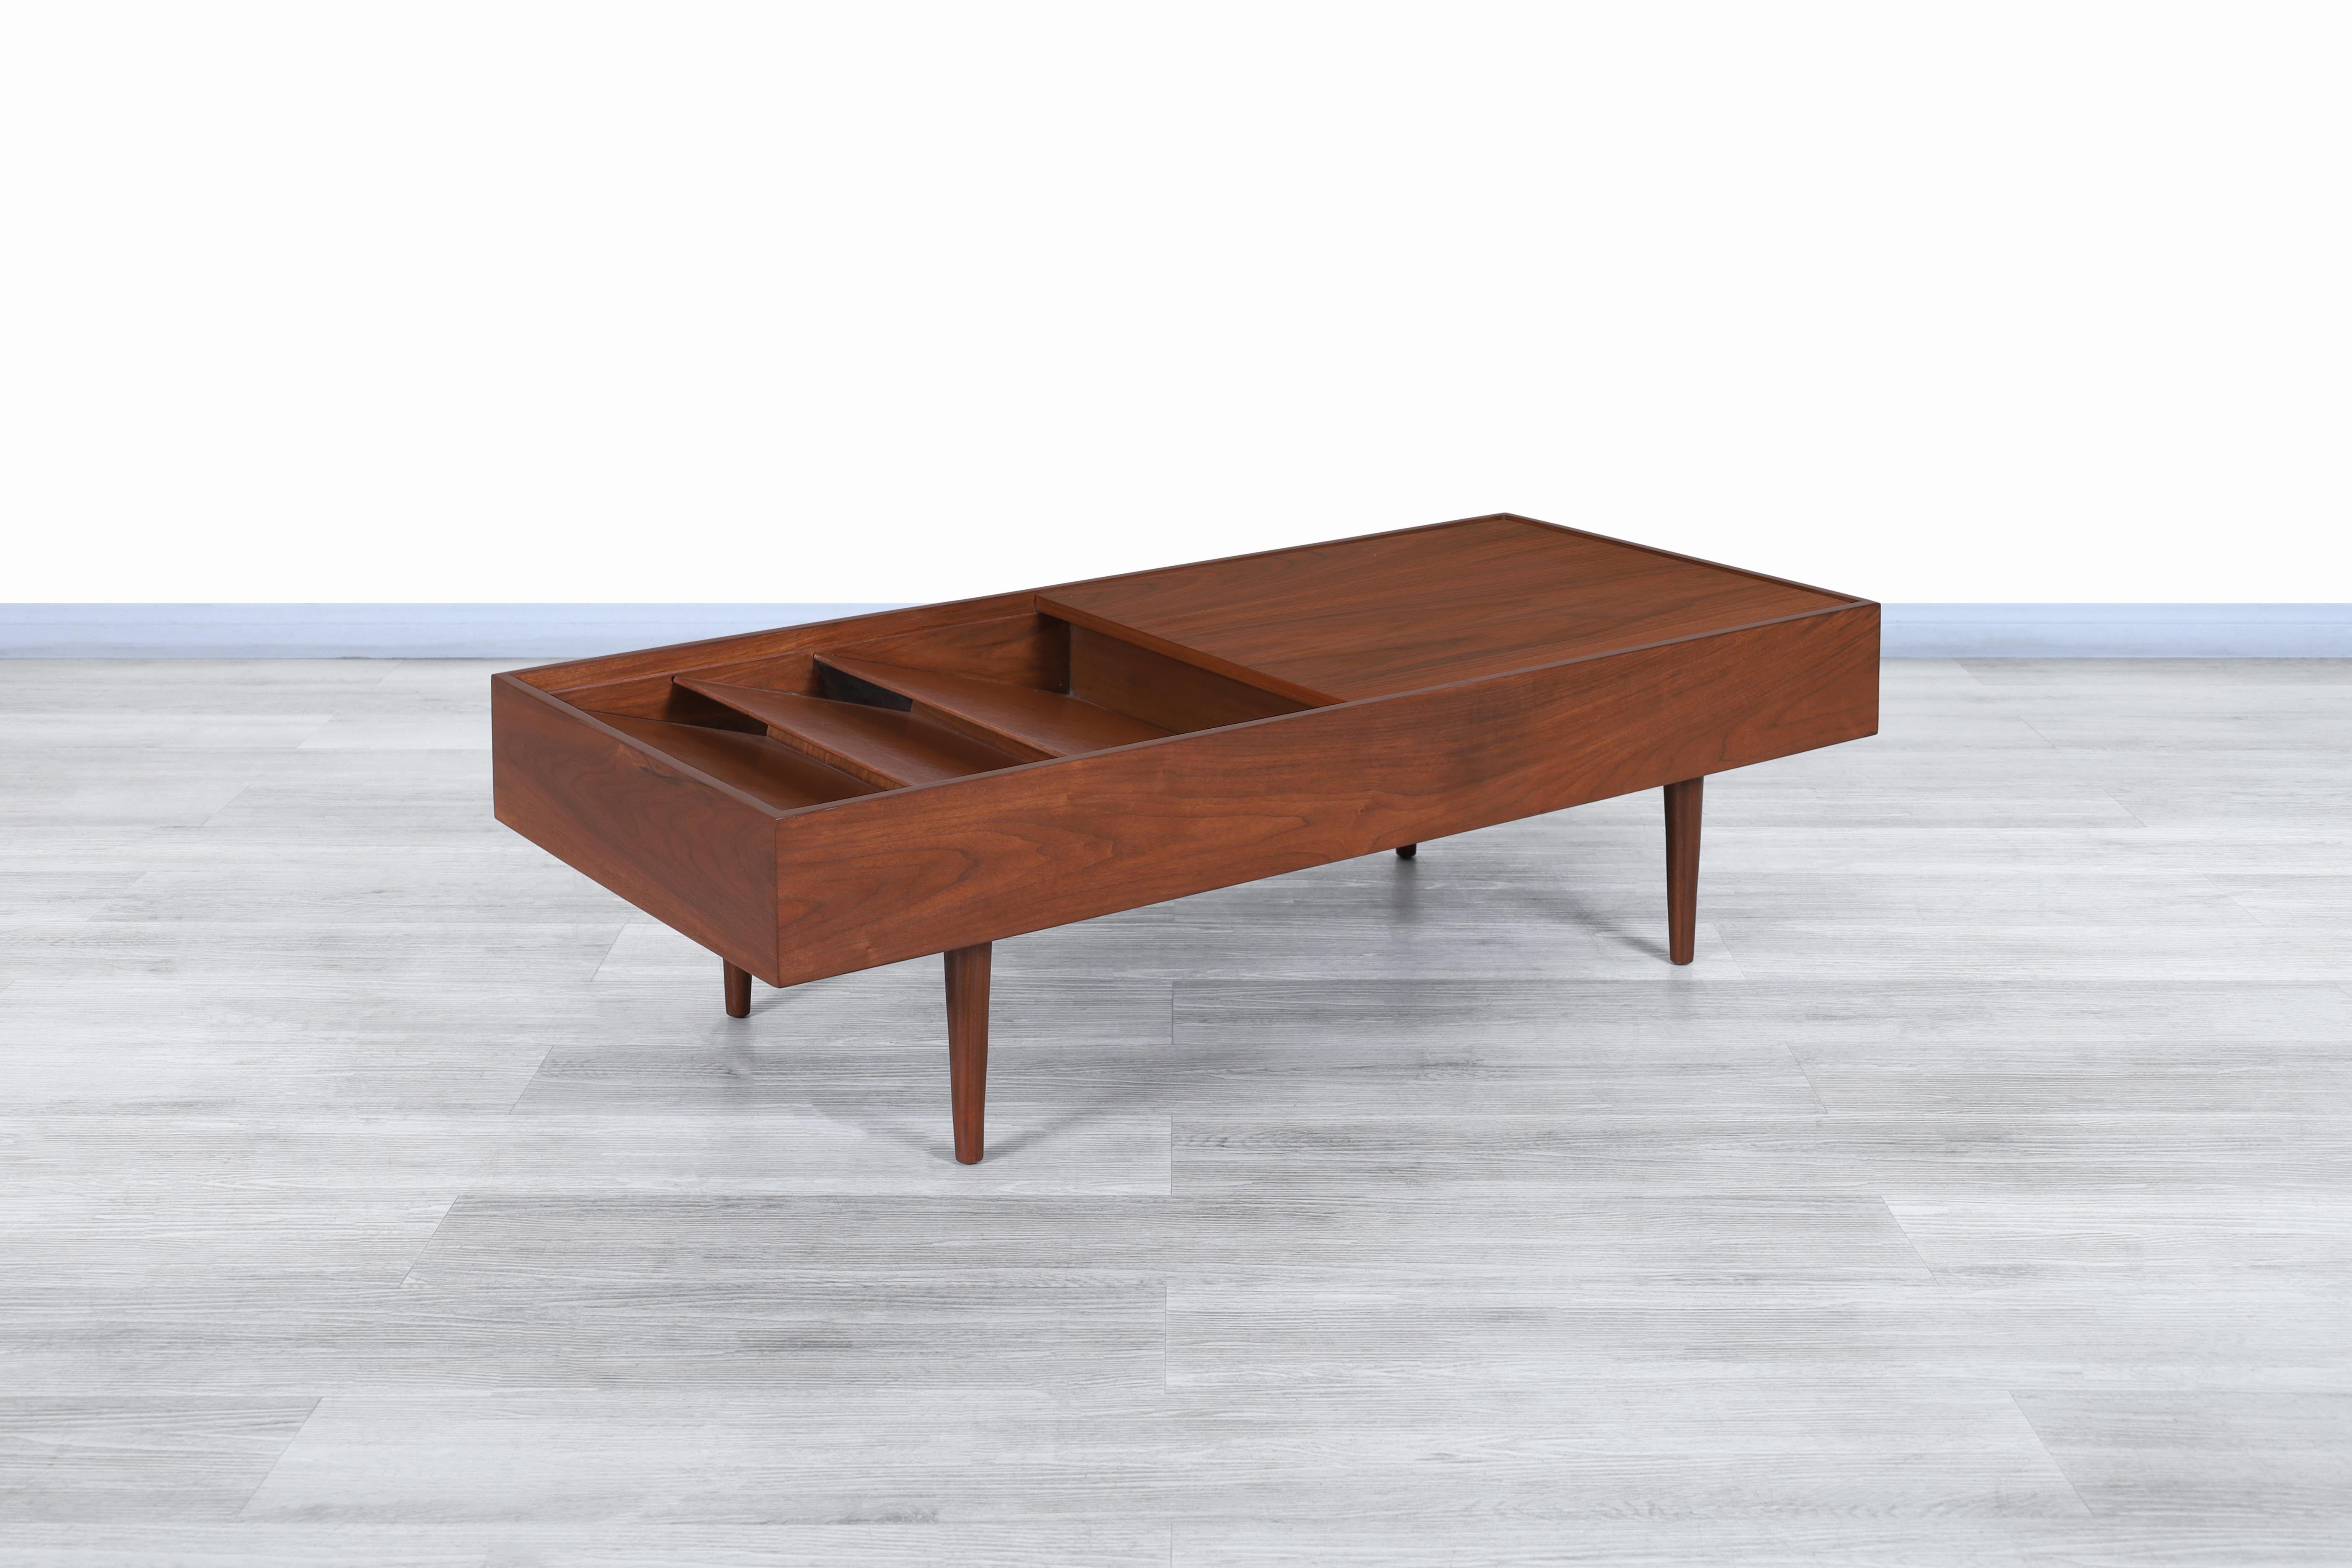 Vintage Walnut Magazine Coffee Table by Milo Baughman for Glenn of California In Excellent Condition For Sale In North Hollywood, CA